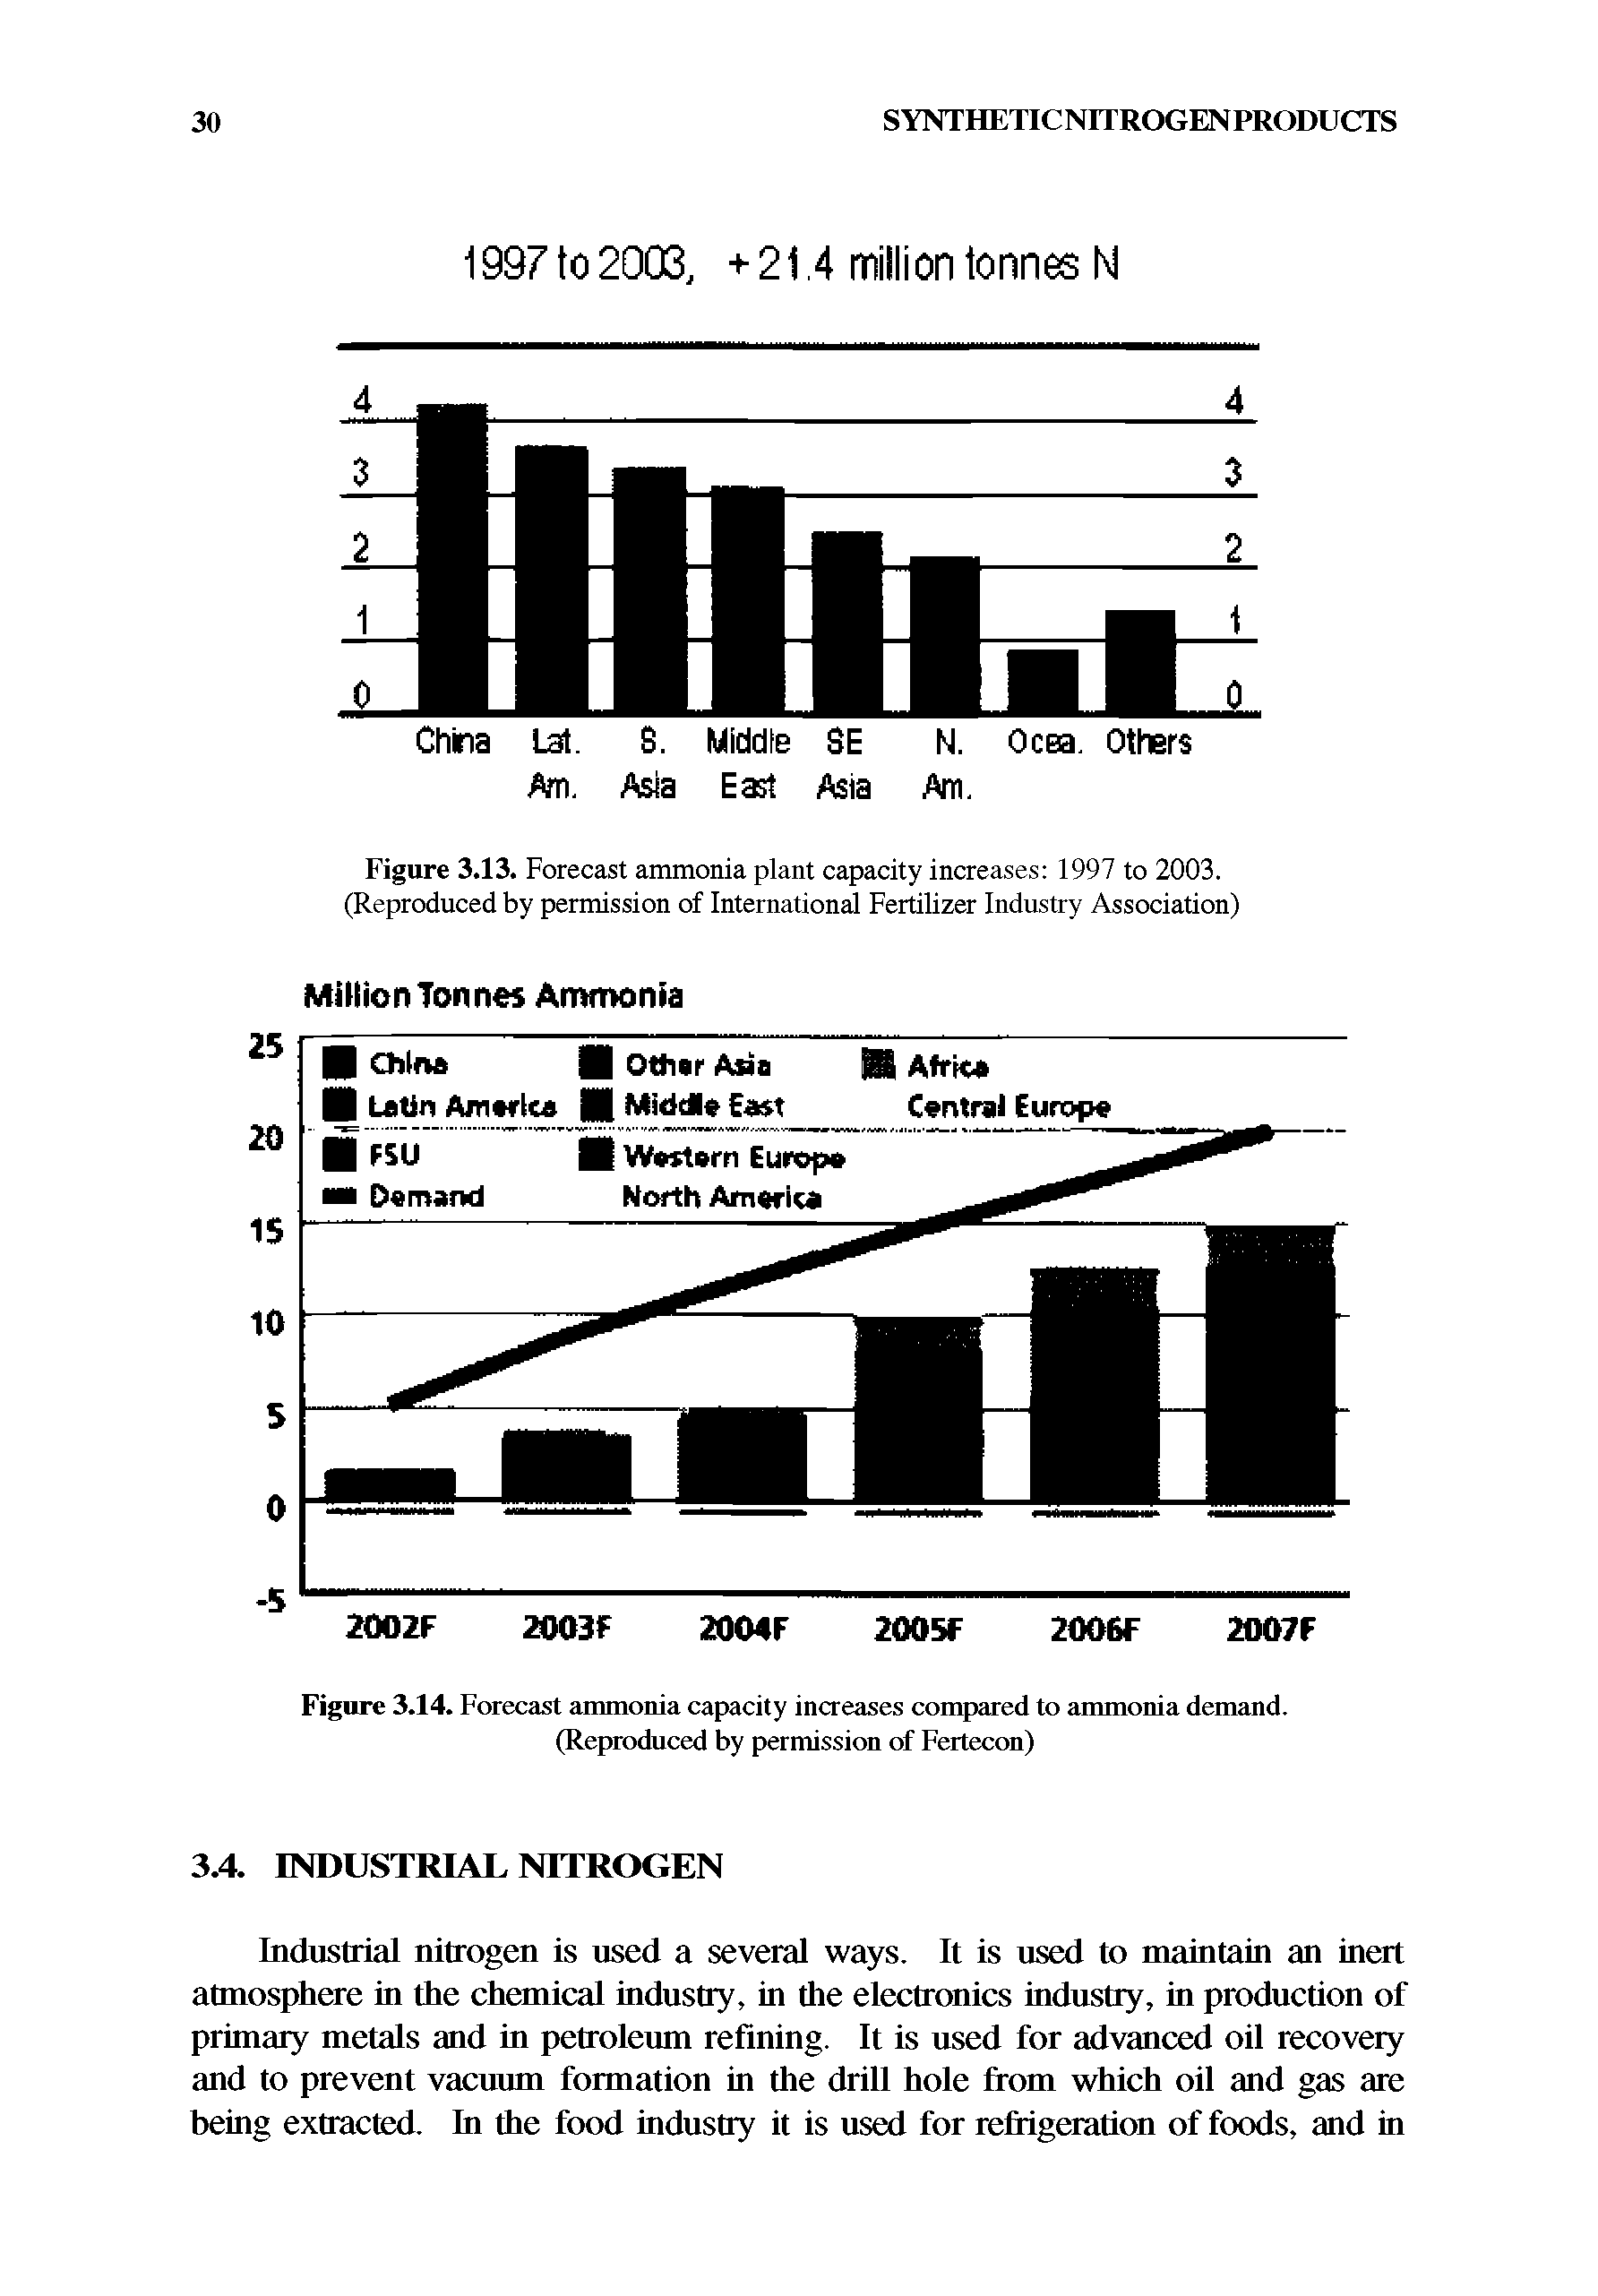 Figure 3.13. Forecast ammonia plant capacity increases 1997 to 2003. (Reproduced by permission of International Fertilizer Industry Association)...